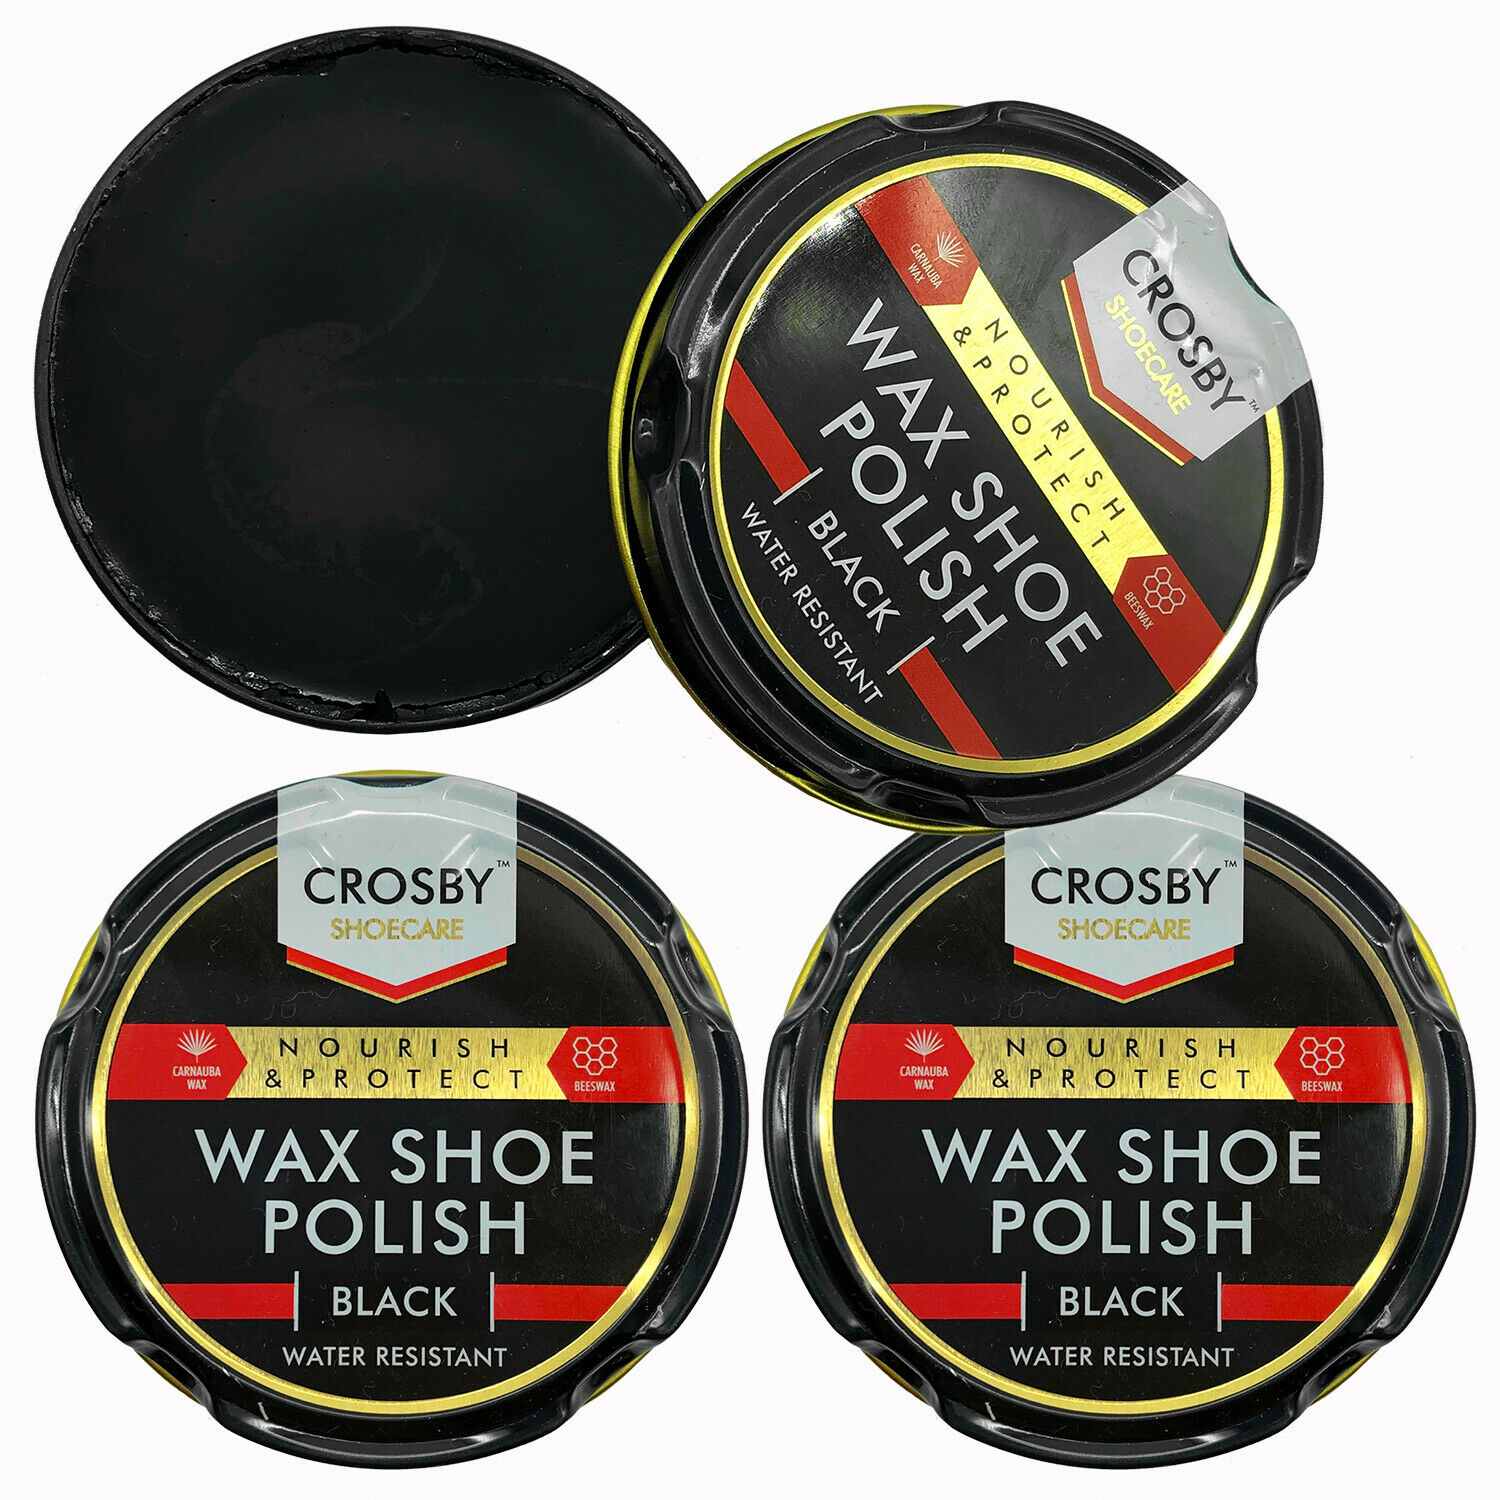 how to polish black leather shoes